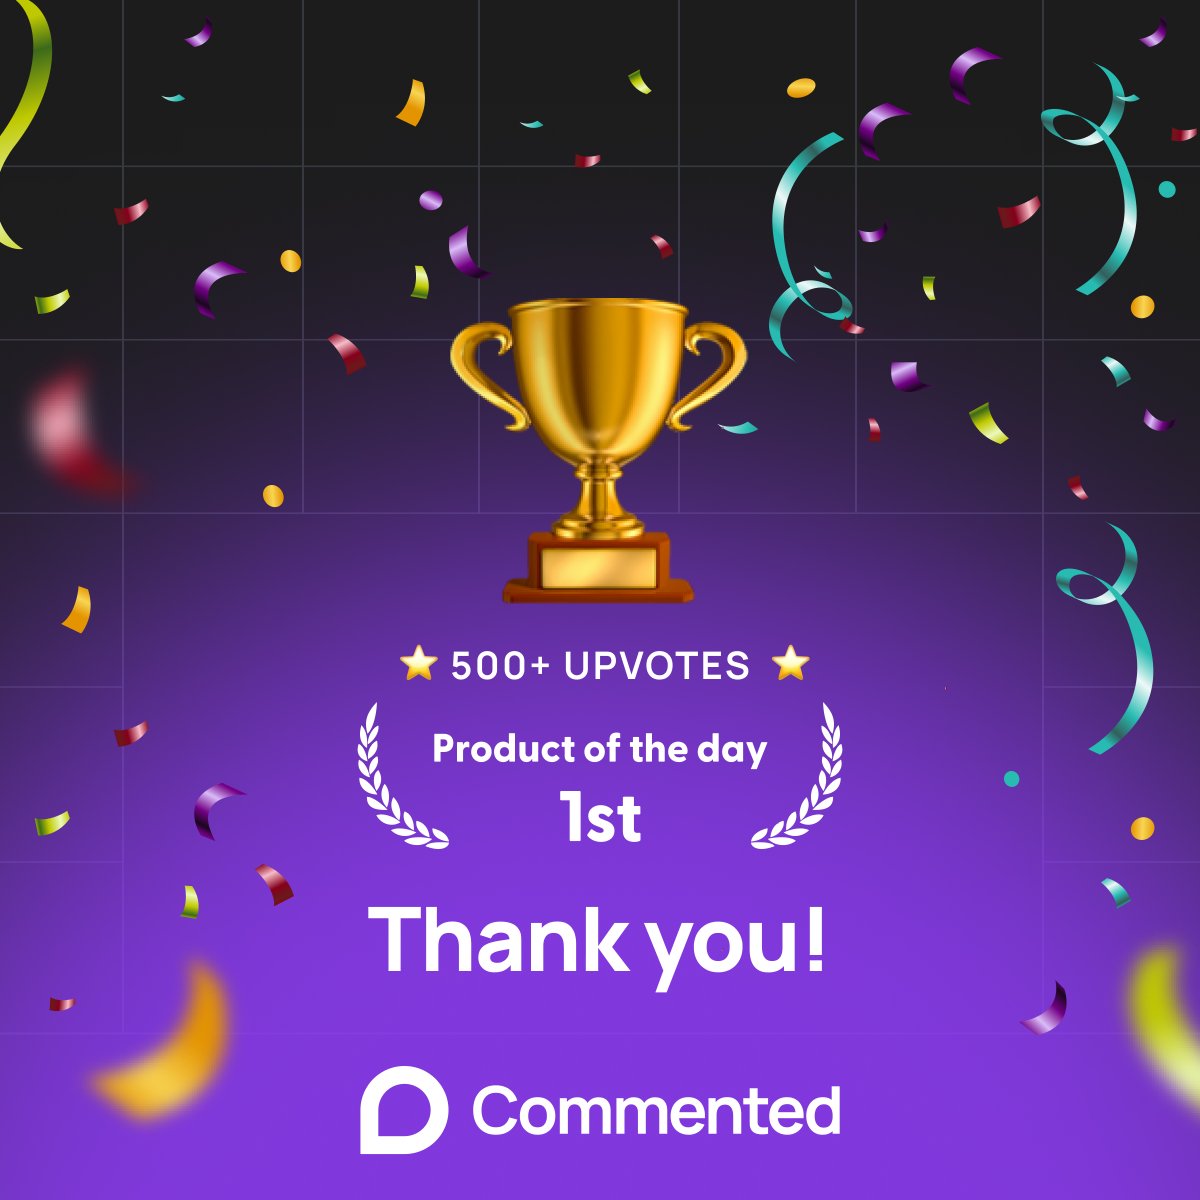 We've just ranked as the #1 product on @ProductHunt  on May 9th! 🎉 Huge thanks to everyone for your incredible support and enthusiasm. We couldn't have achieved this milestone without you!

Let's keep the momentum going and continue revolutionizing collaboration together. Thank…